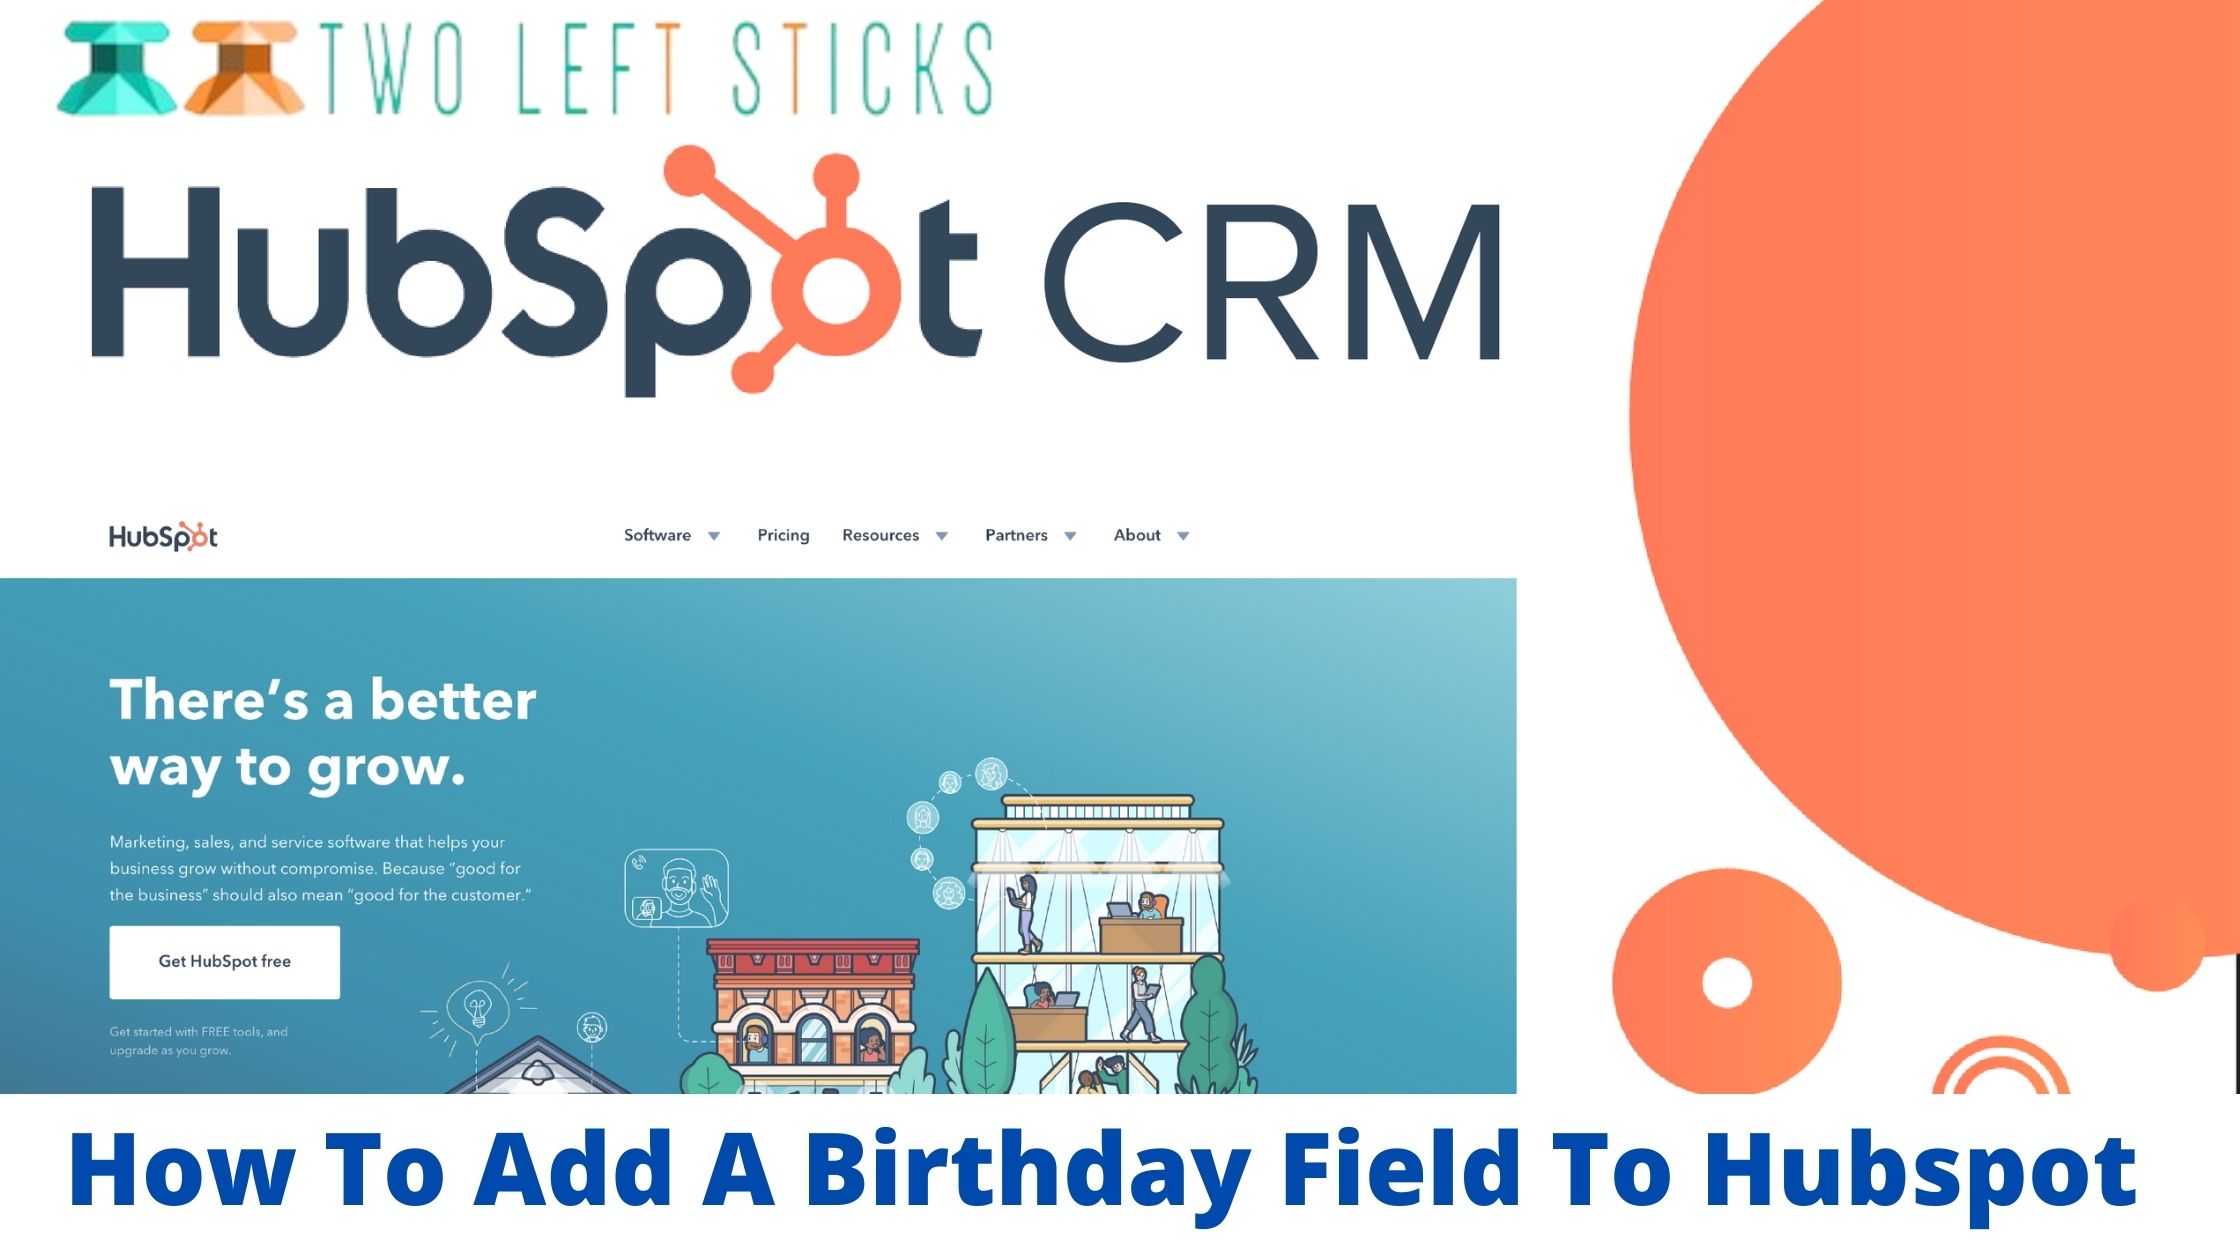 How To Add A Birthday Field To Hubspot